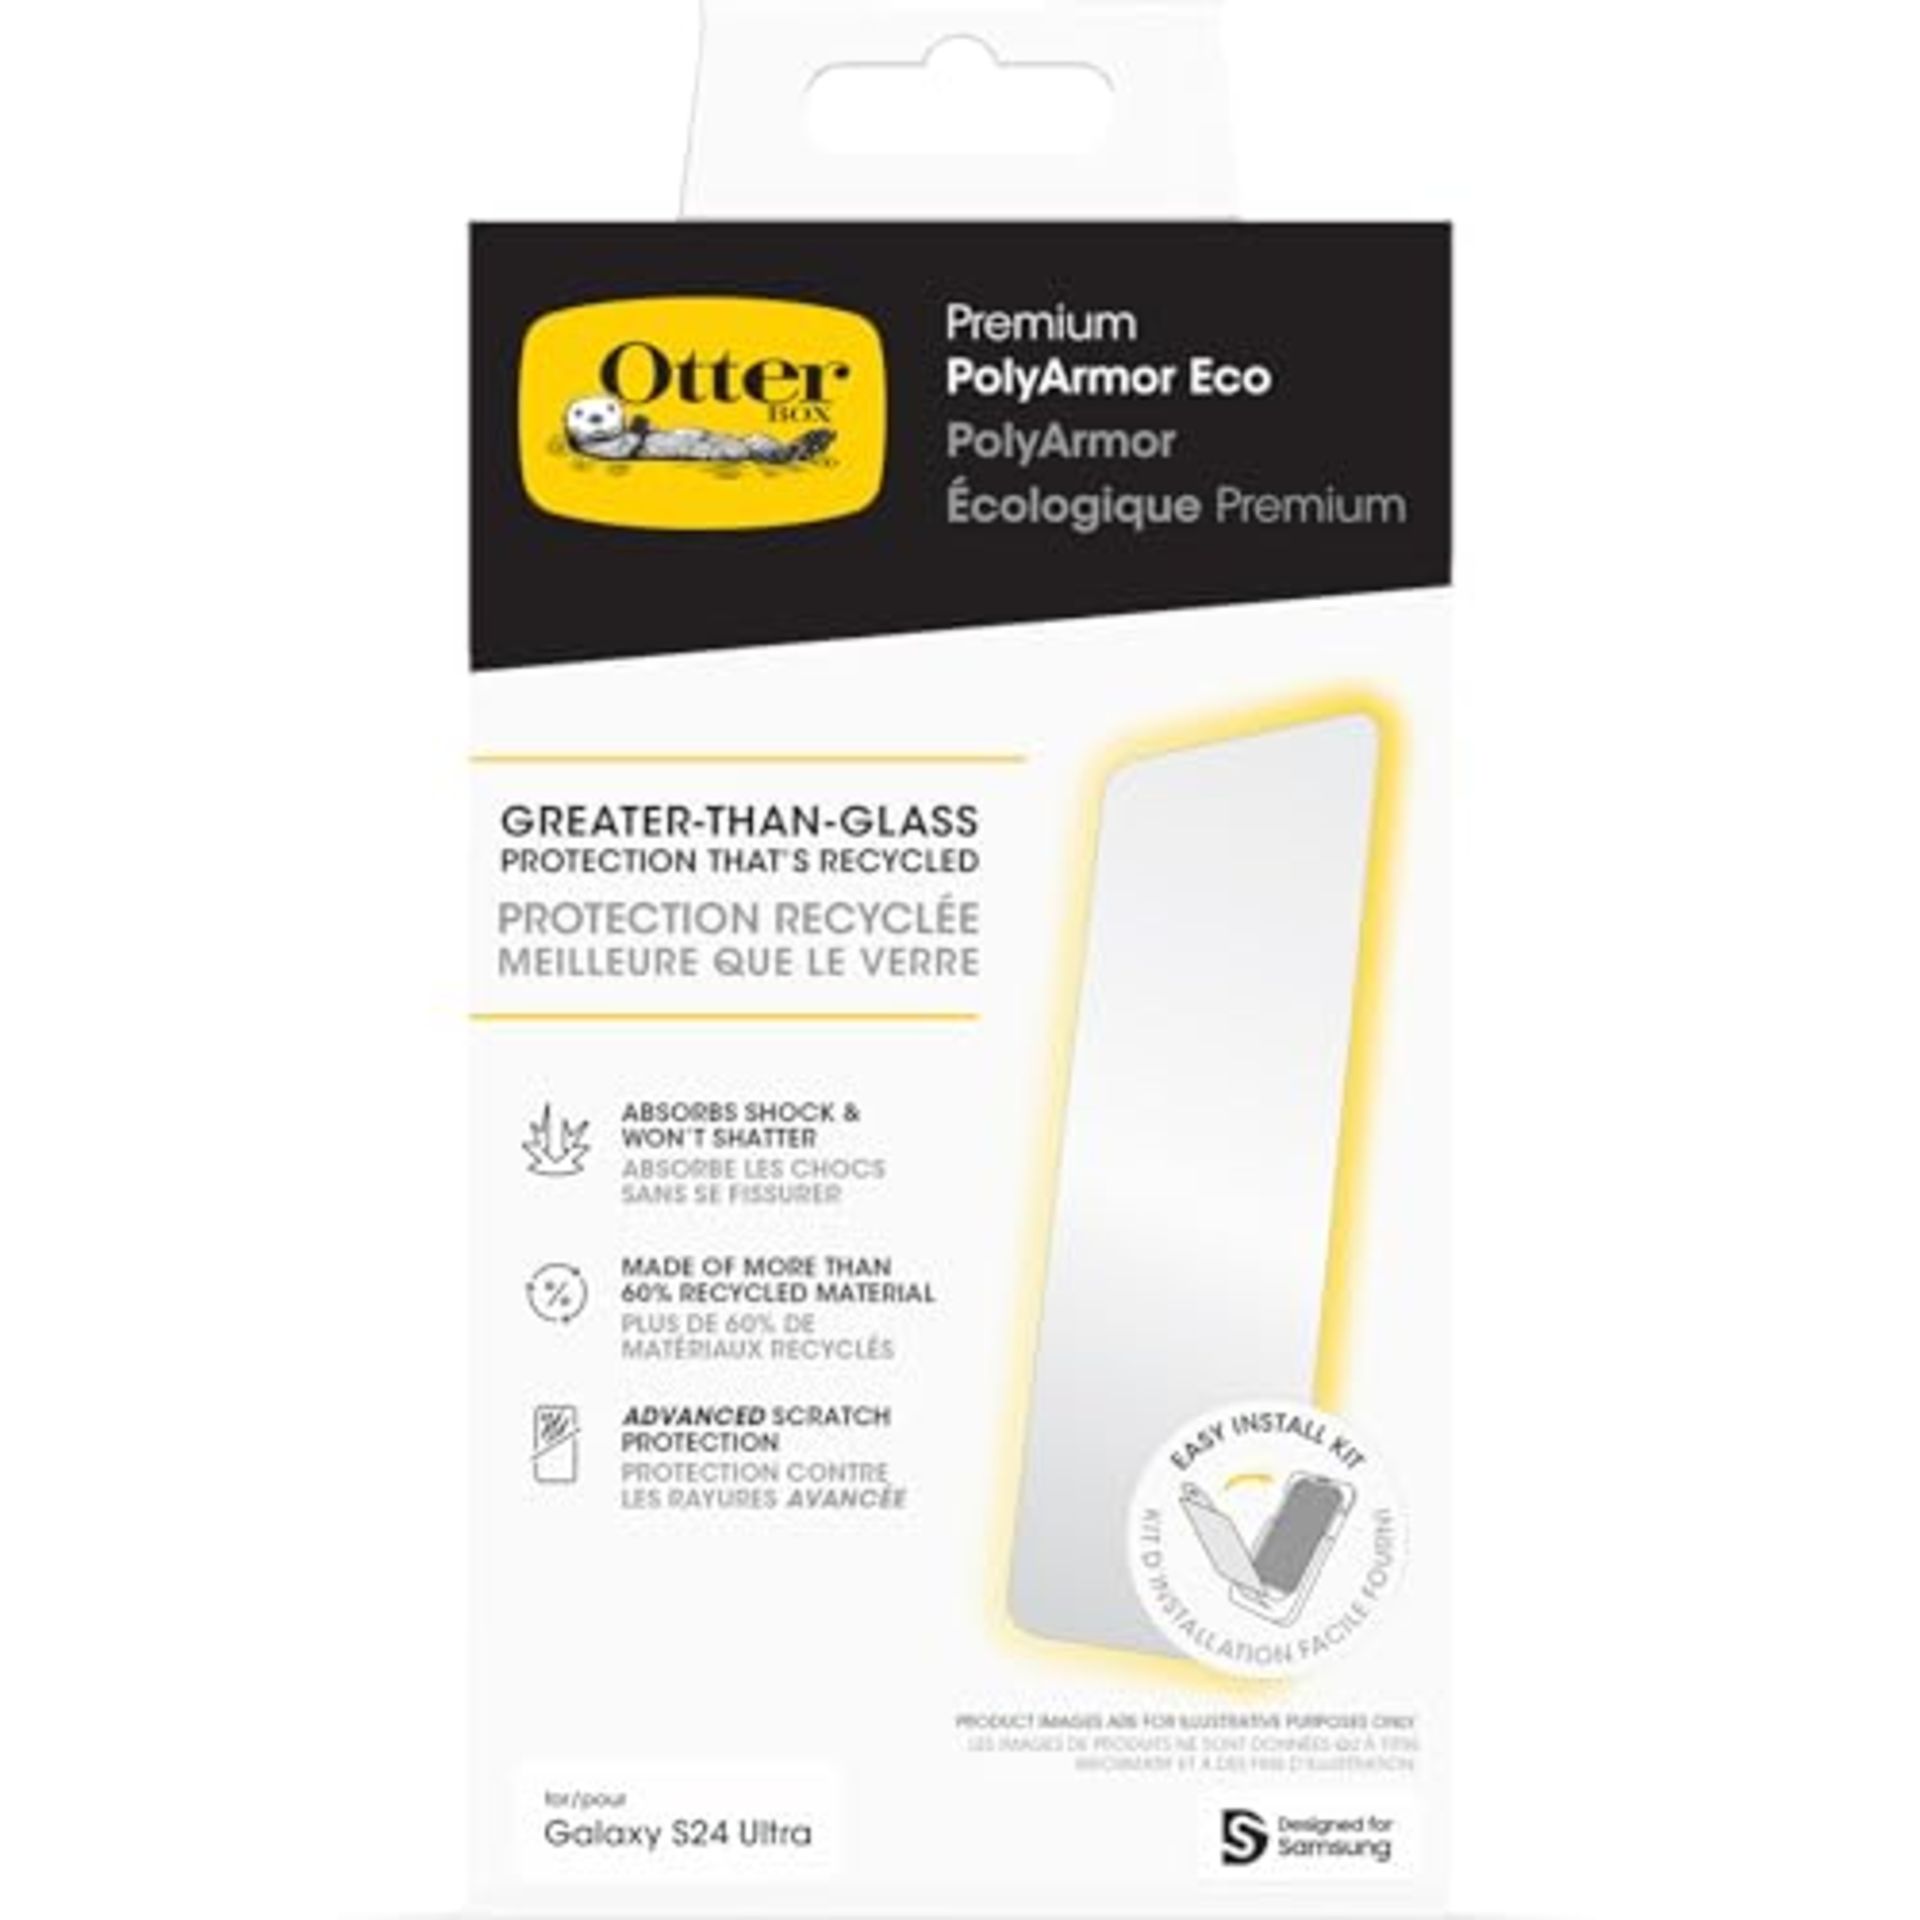 OtterBox Premium PolyArmour Eco Screen Protector for Samsung Galaxy S24 Ultra, Ultra S